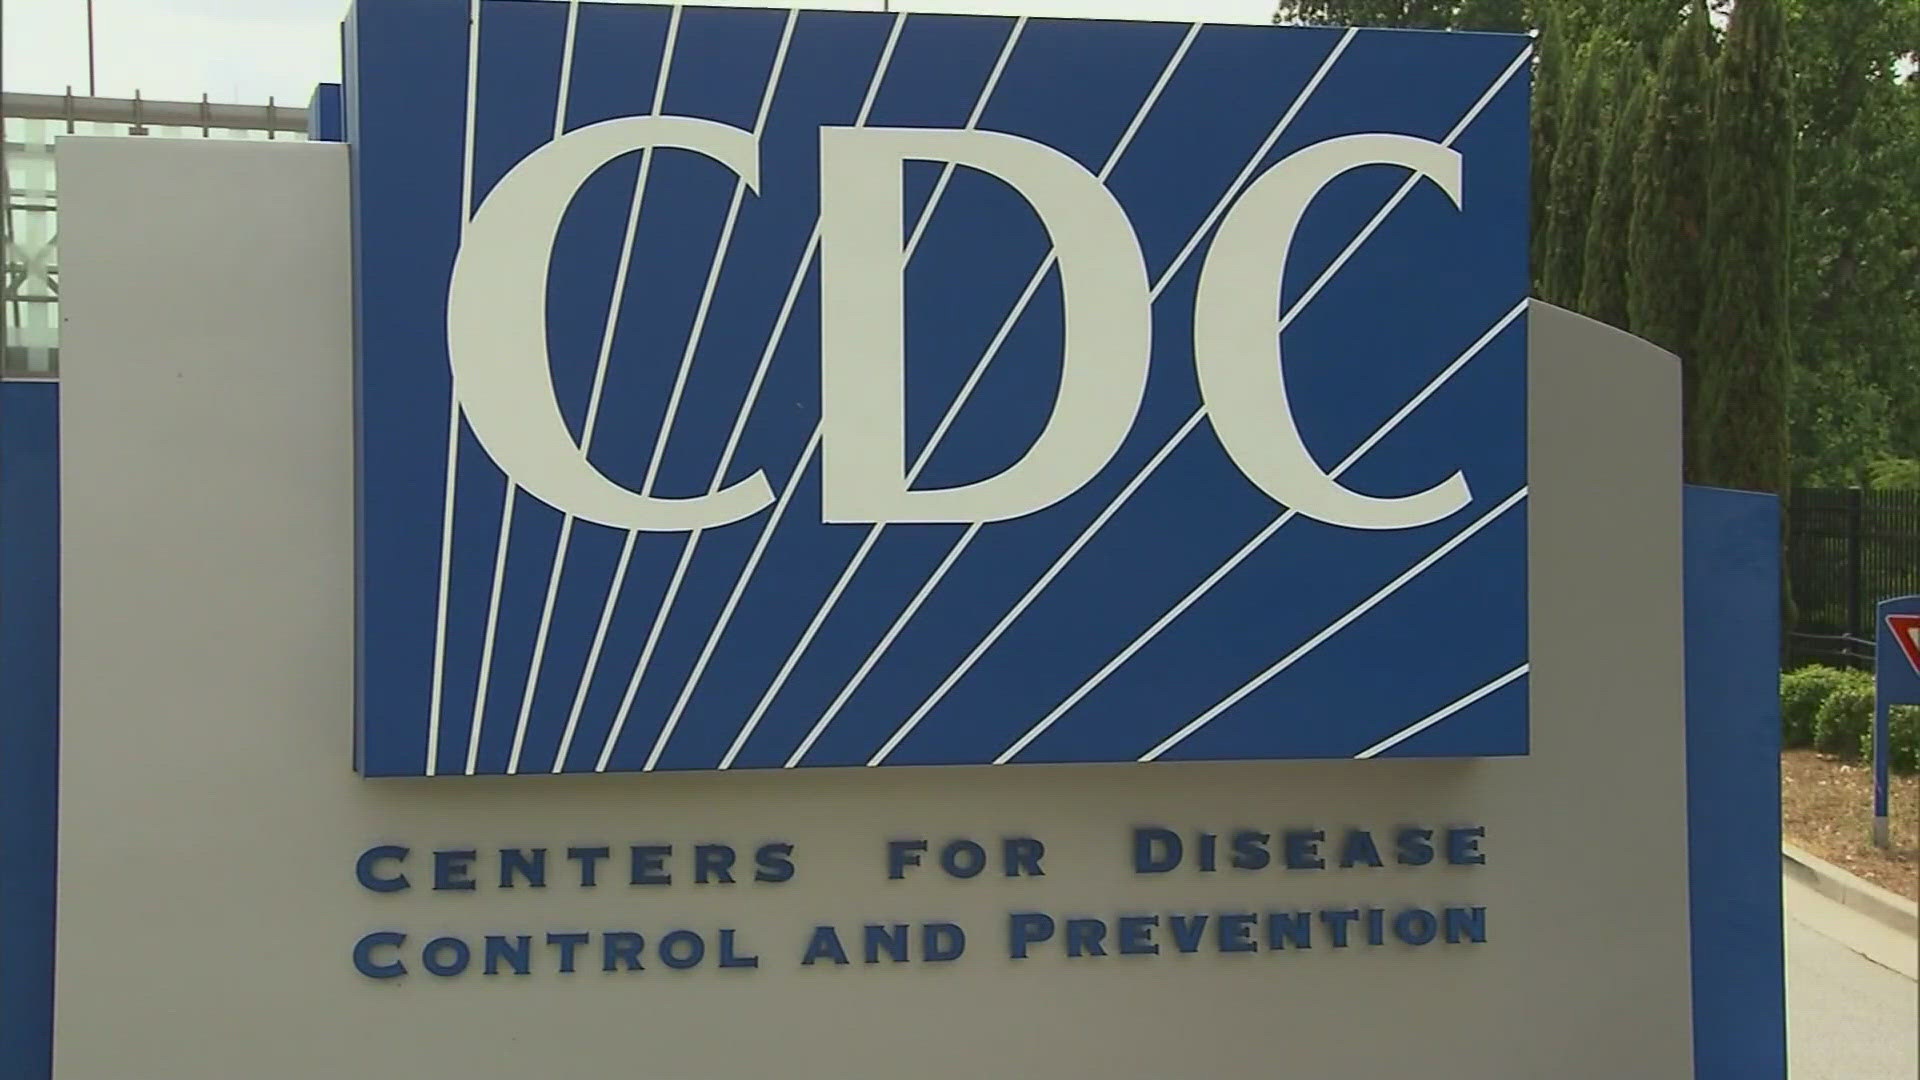 If you have symptoms, the CDC says you should stay home until your symptoms improve and it's been 24 hours since you had a fever.